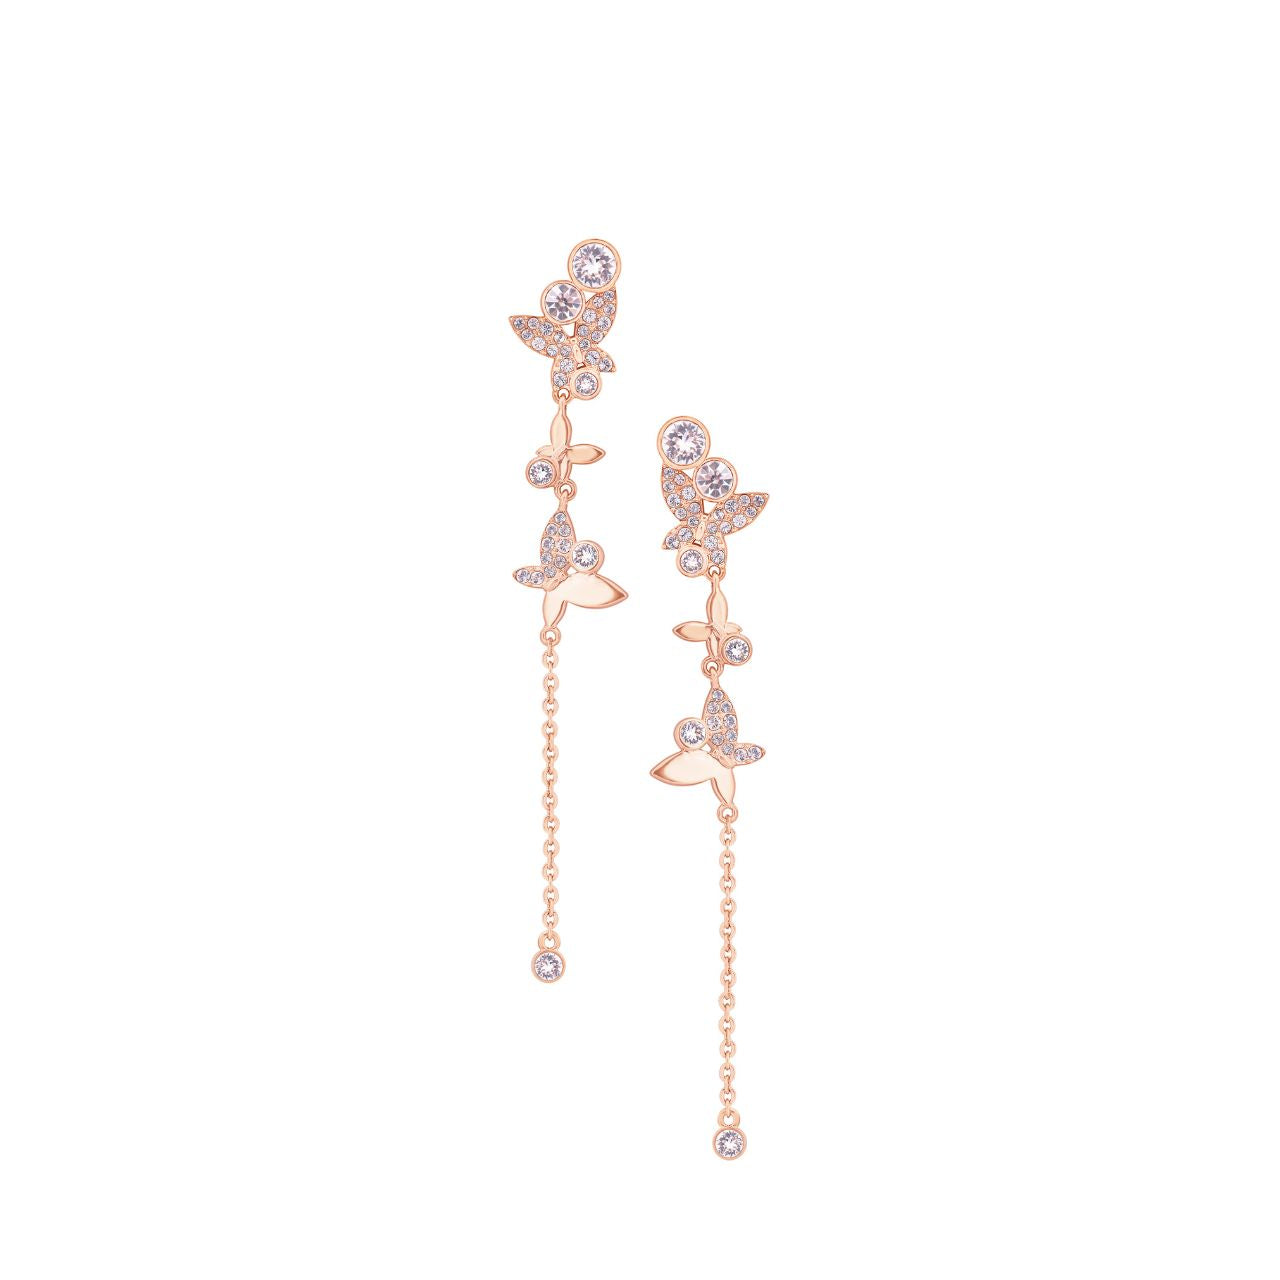 Tipperary Crystal Butterfly Rose Gold Drop Earrings  Drawing inspiration from urban garden, the Tipperary Crystal Butterfly collection transforms an icon into something modern and unexpected. Playful and elegant, this collection draws from the inherent beauty of the butterfly.